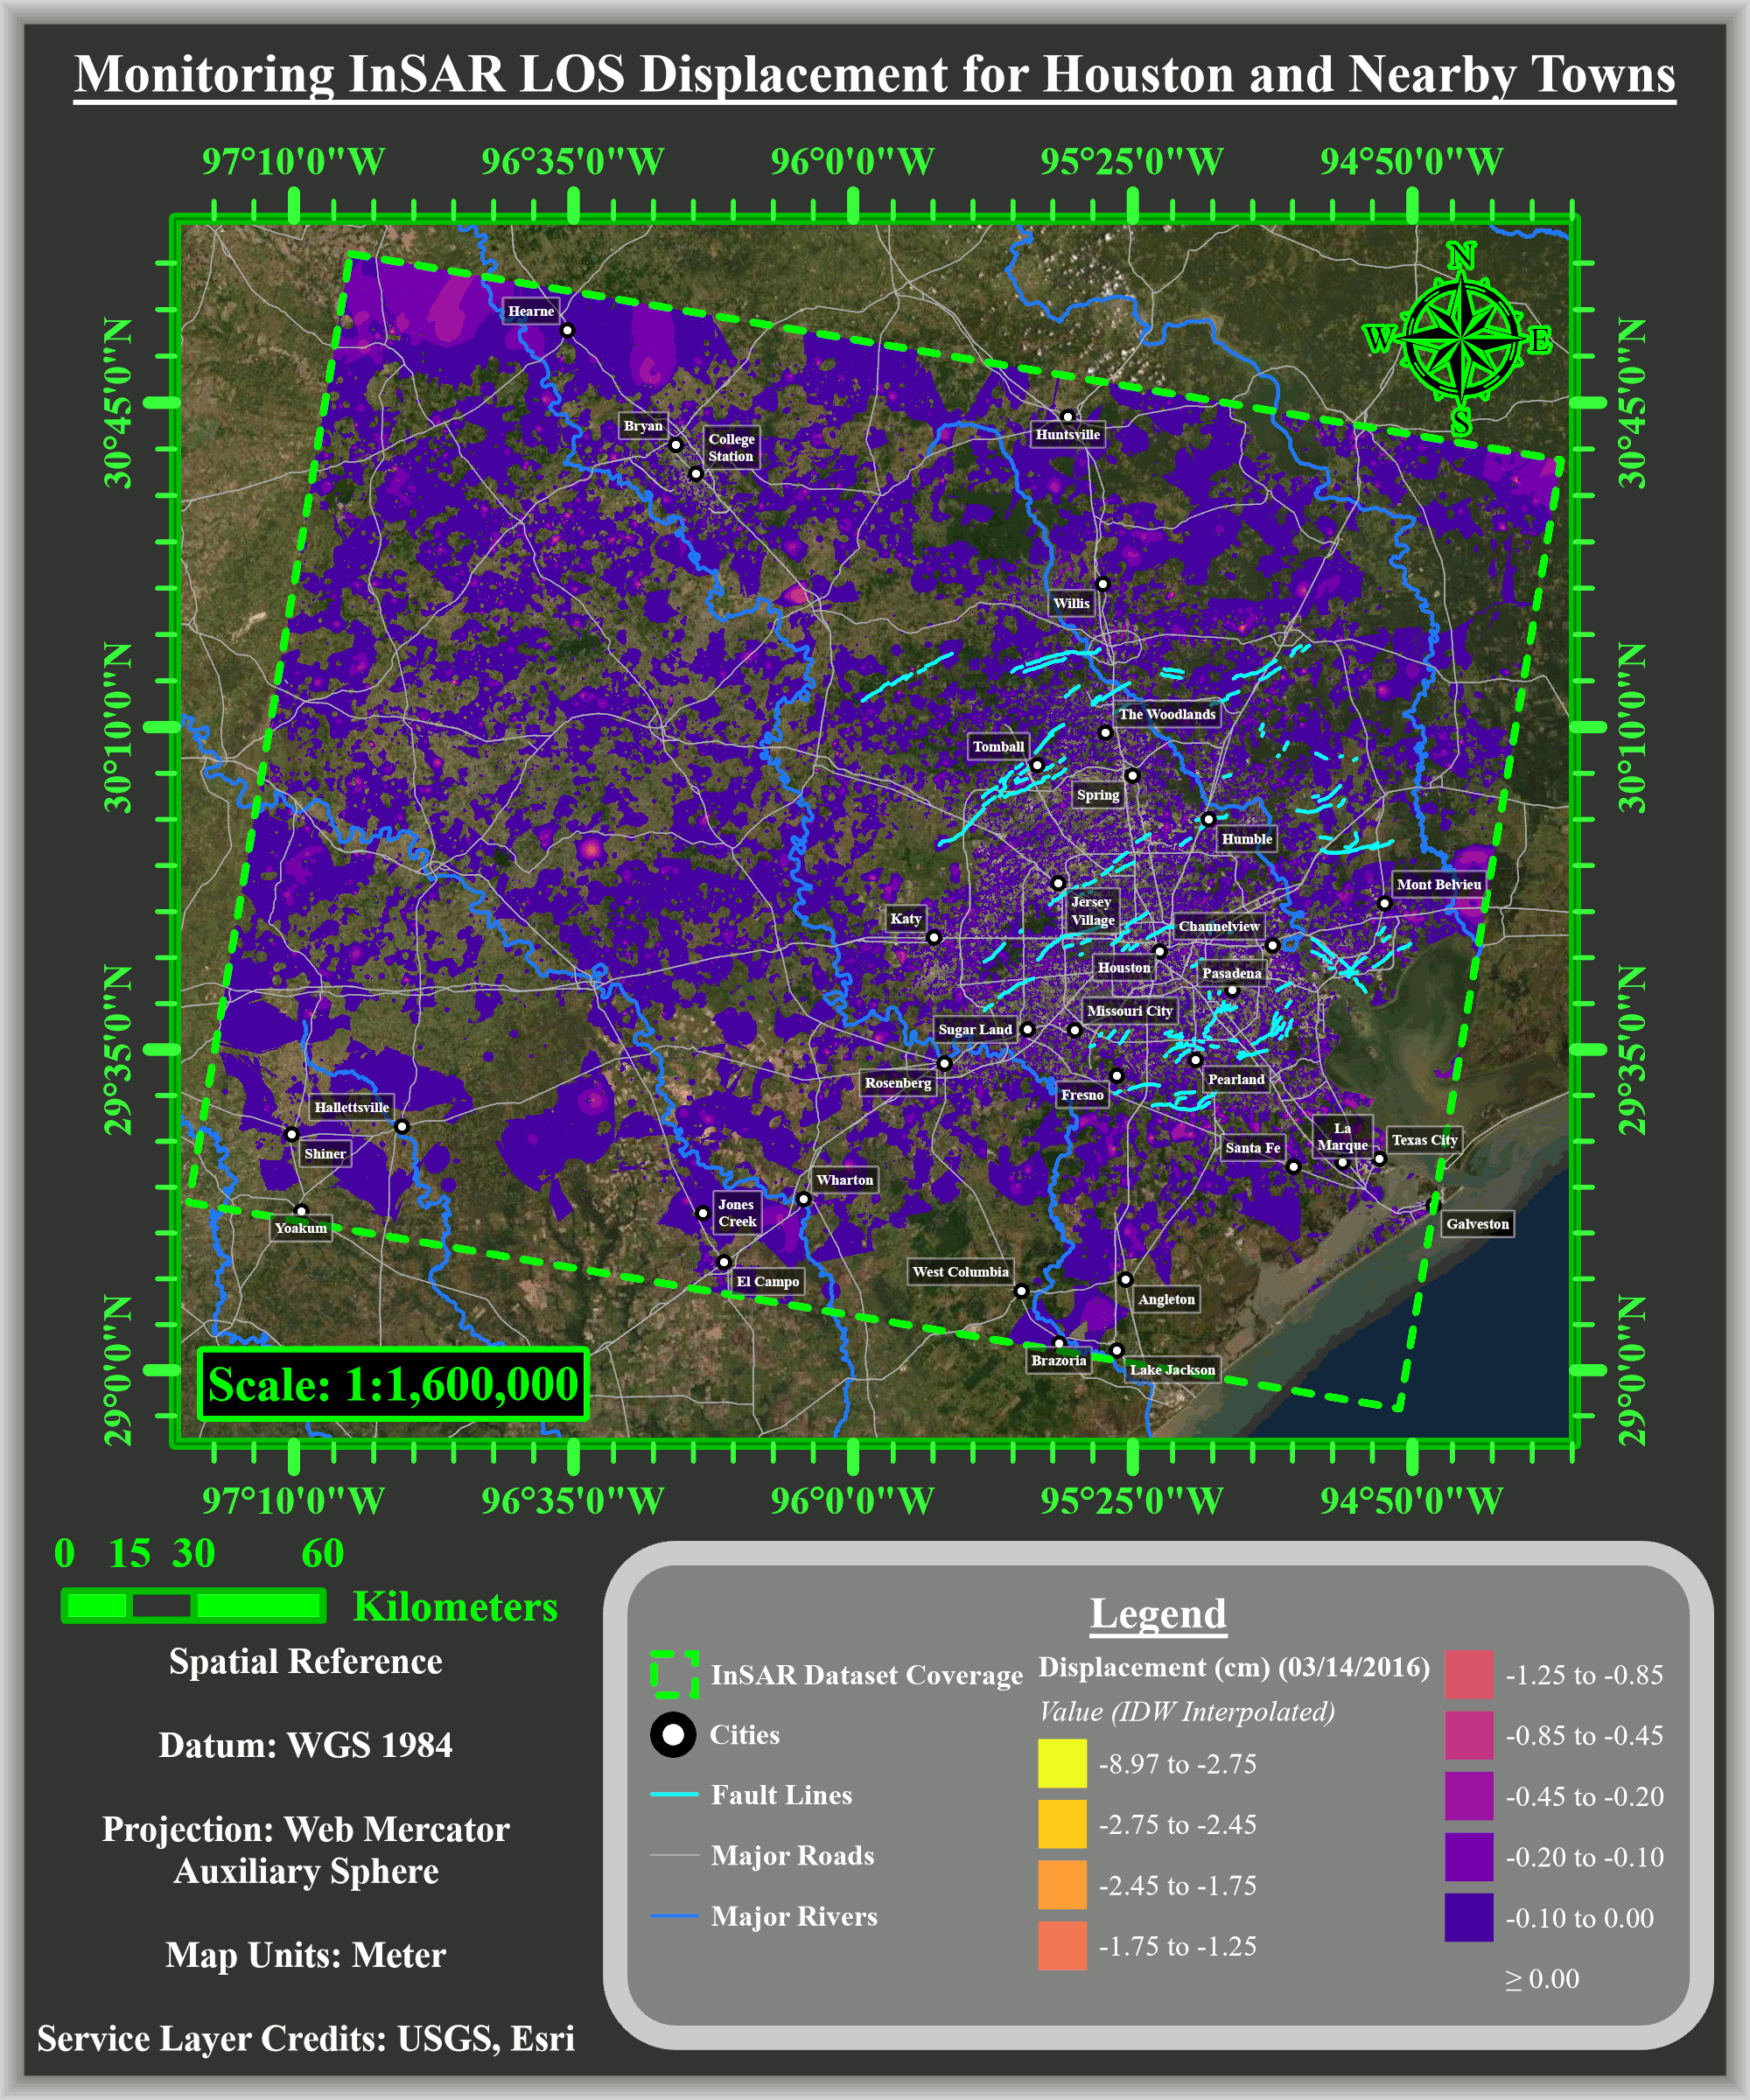 Image showing total ground displacement from March 2016 to December 2020 or Houston and surrounding areas.